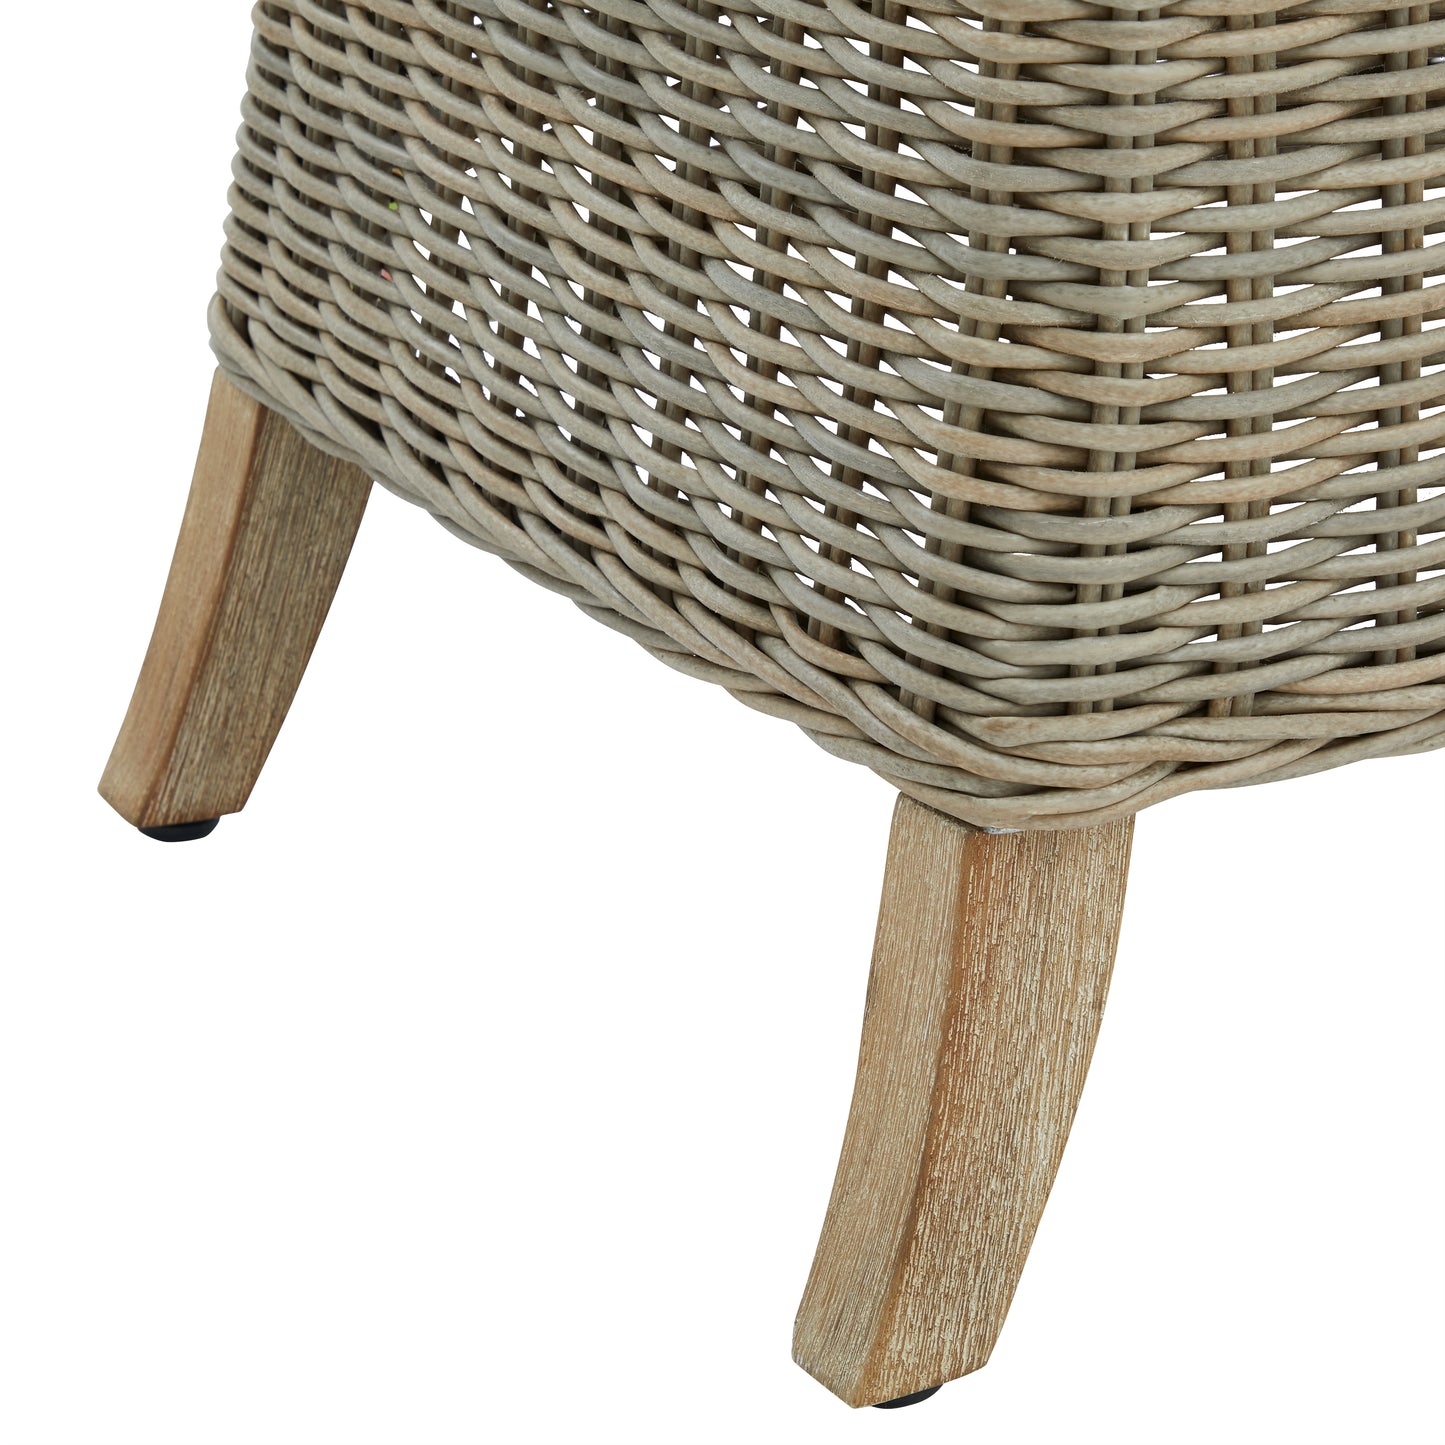 Riviera Natural Wicker Dining Chair – Click Style